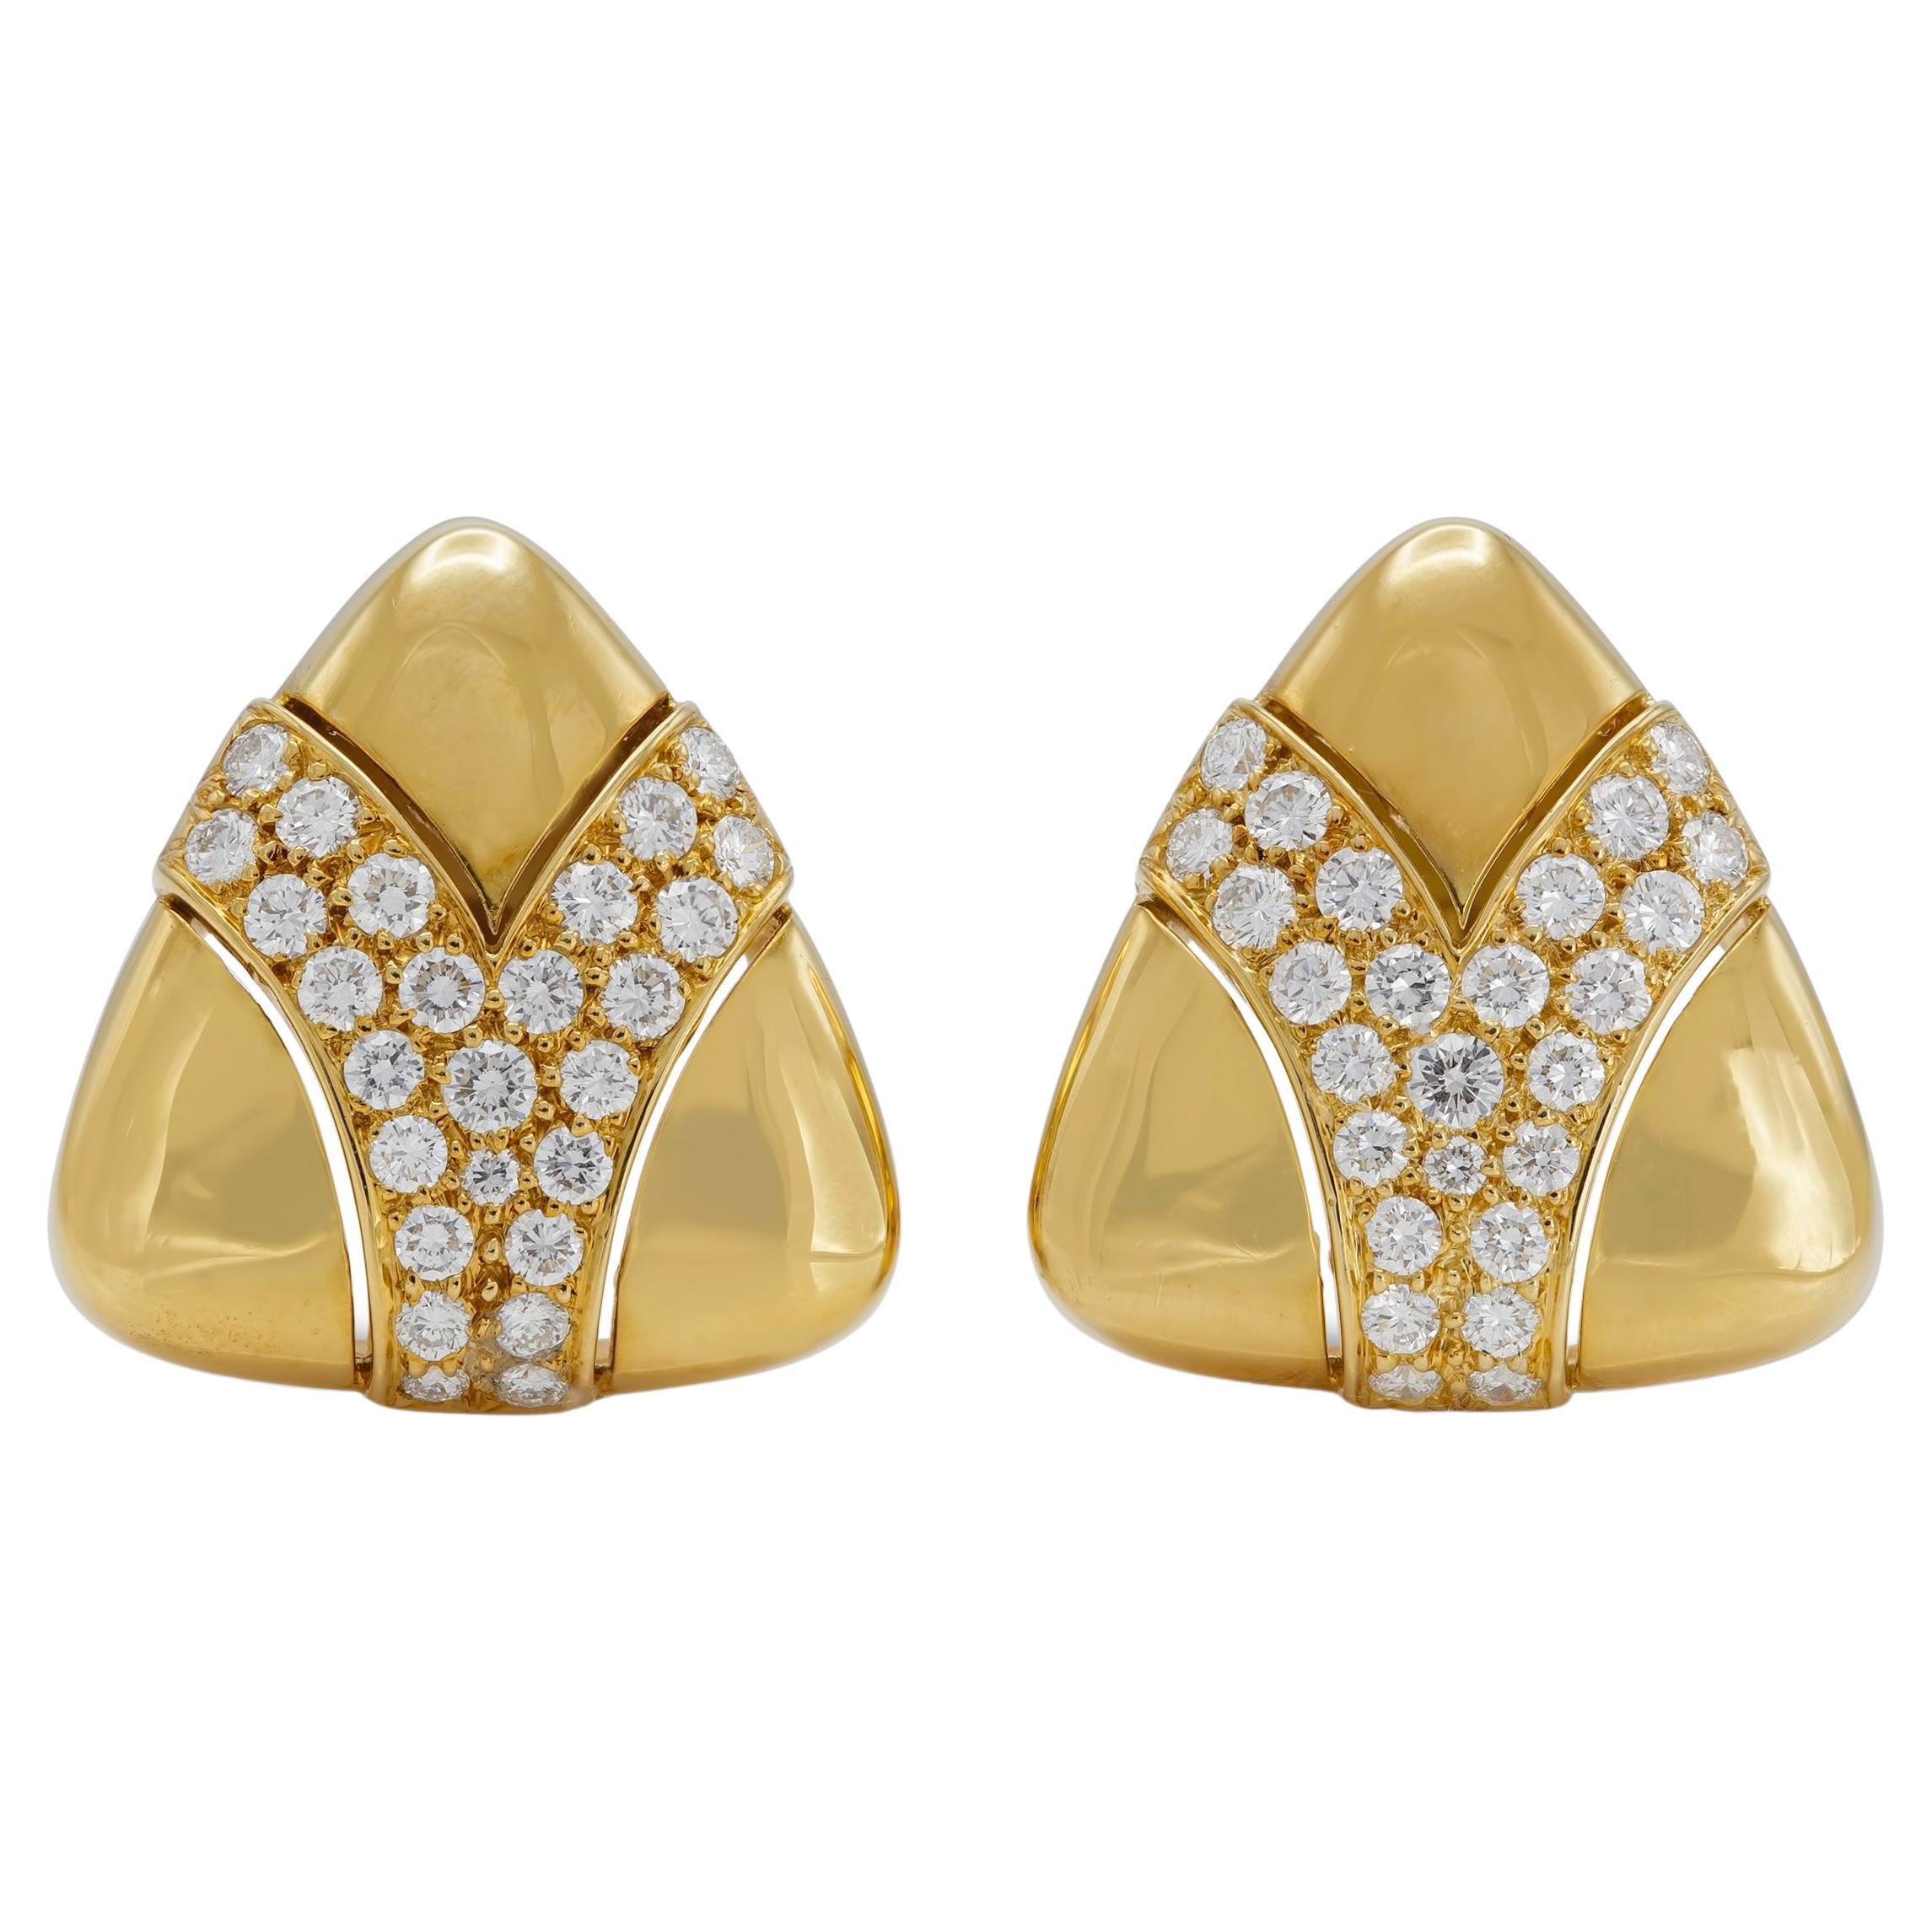 Gold and Diamonds Triangle Earrings